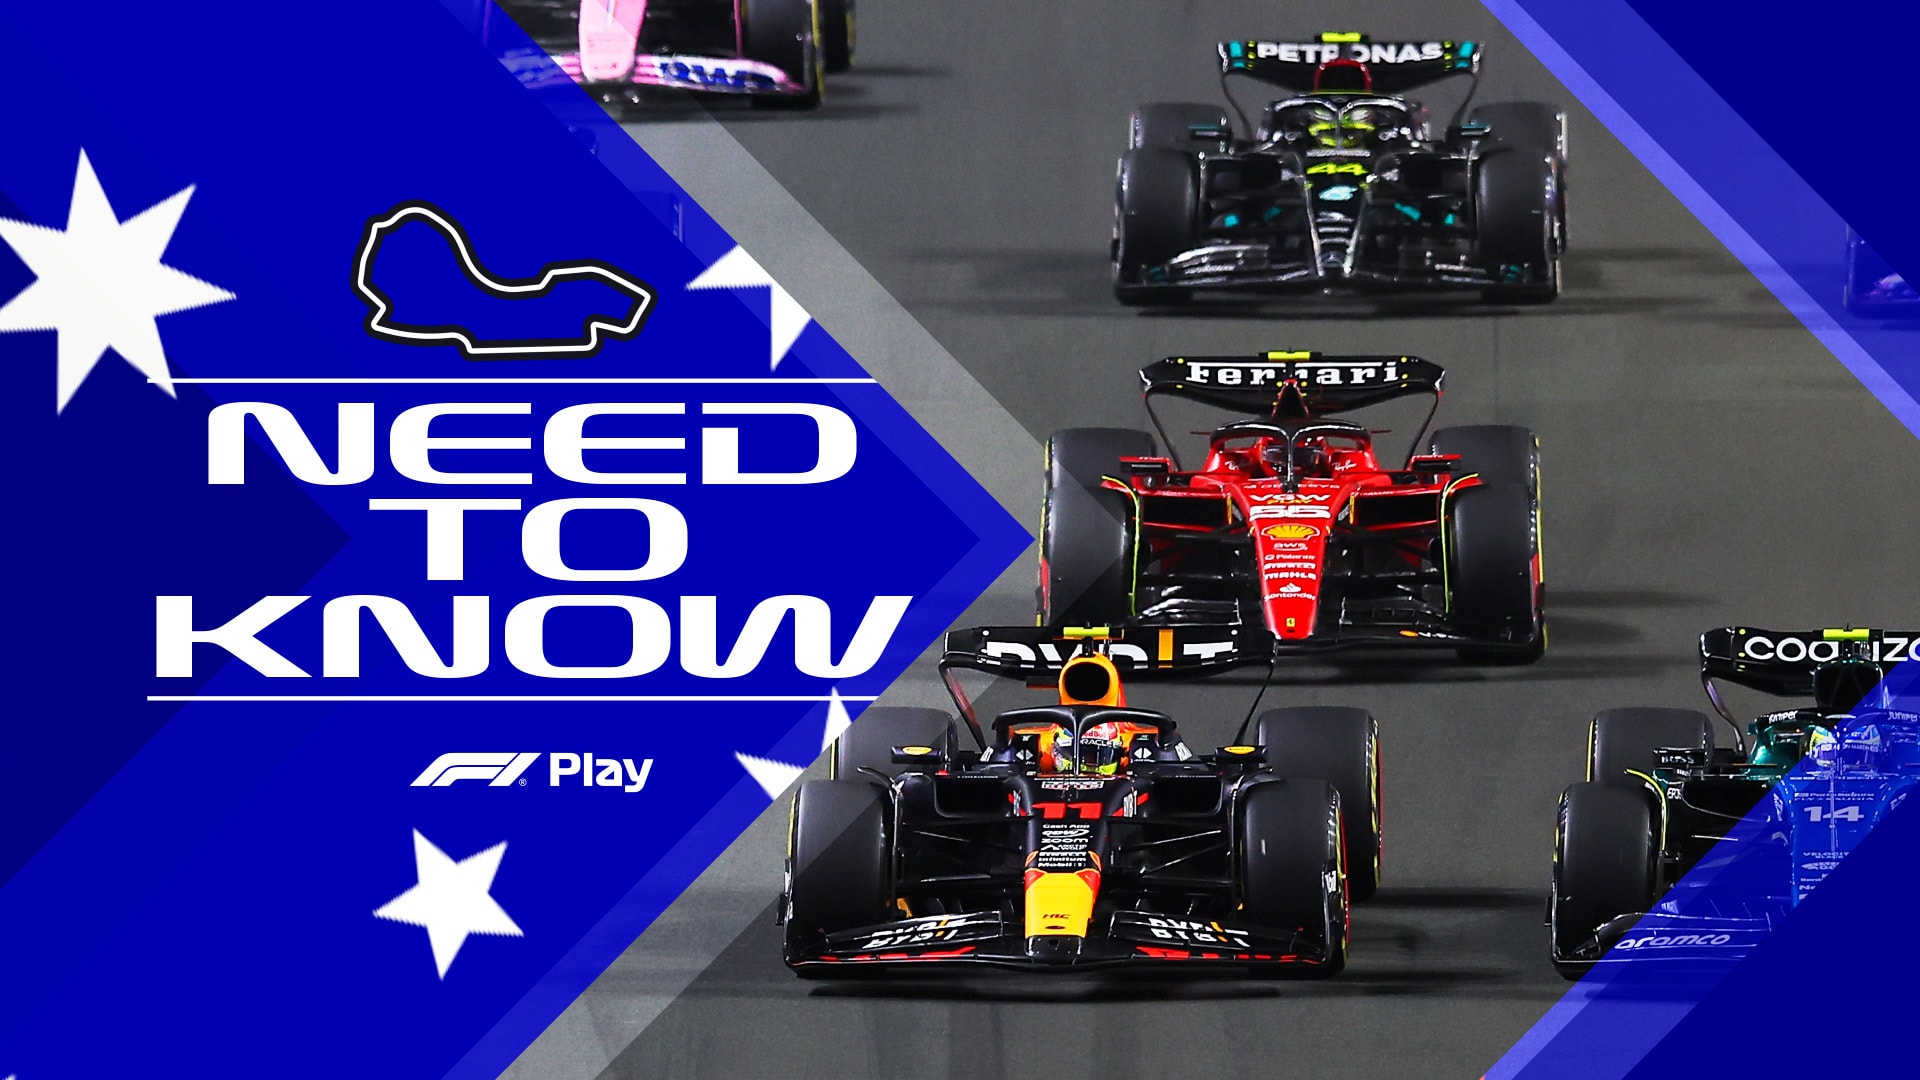 NEED TO KNOW The most important facts, stats and trivia ahead of the 2023 Australian Grand Prix Formula 1®